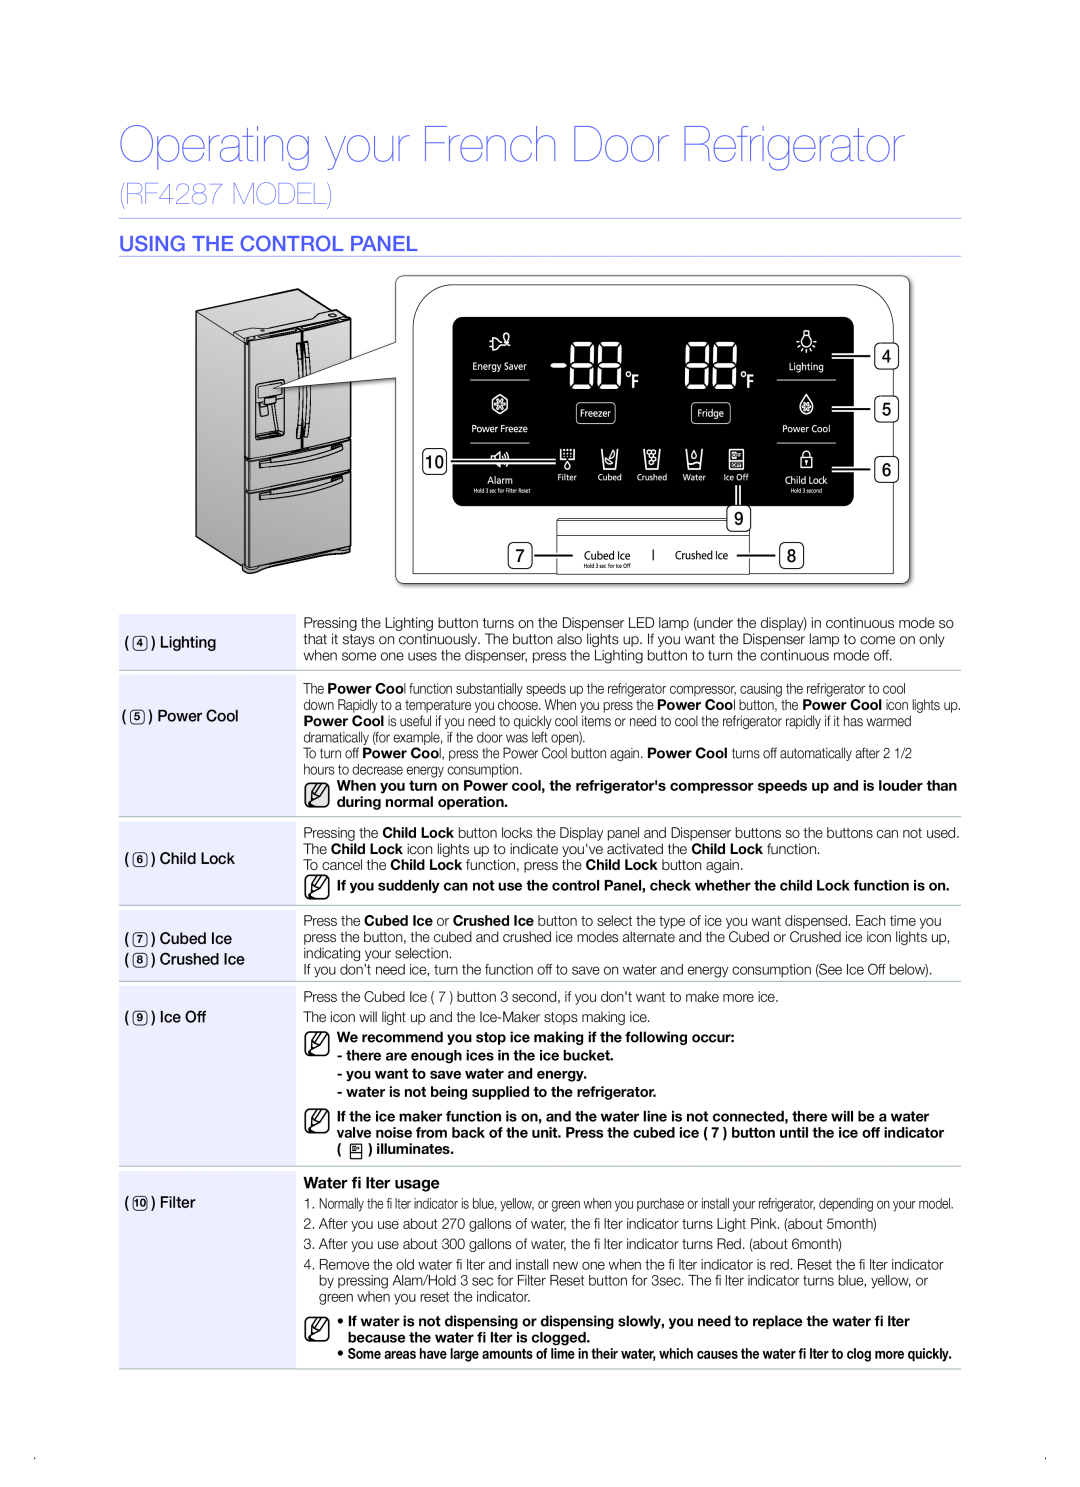 Samsung Operating your French Door Refrigerator, RF4287 MODEL, Using The Control Panel, Child Lock, Cubed Ice, Ice Off 